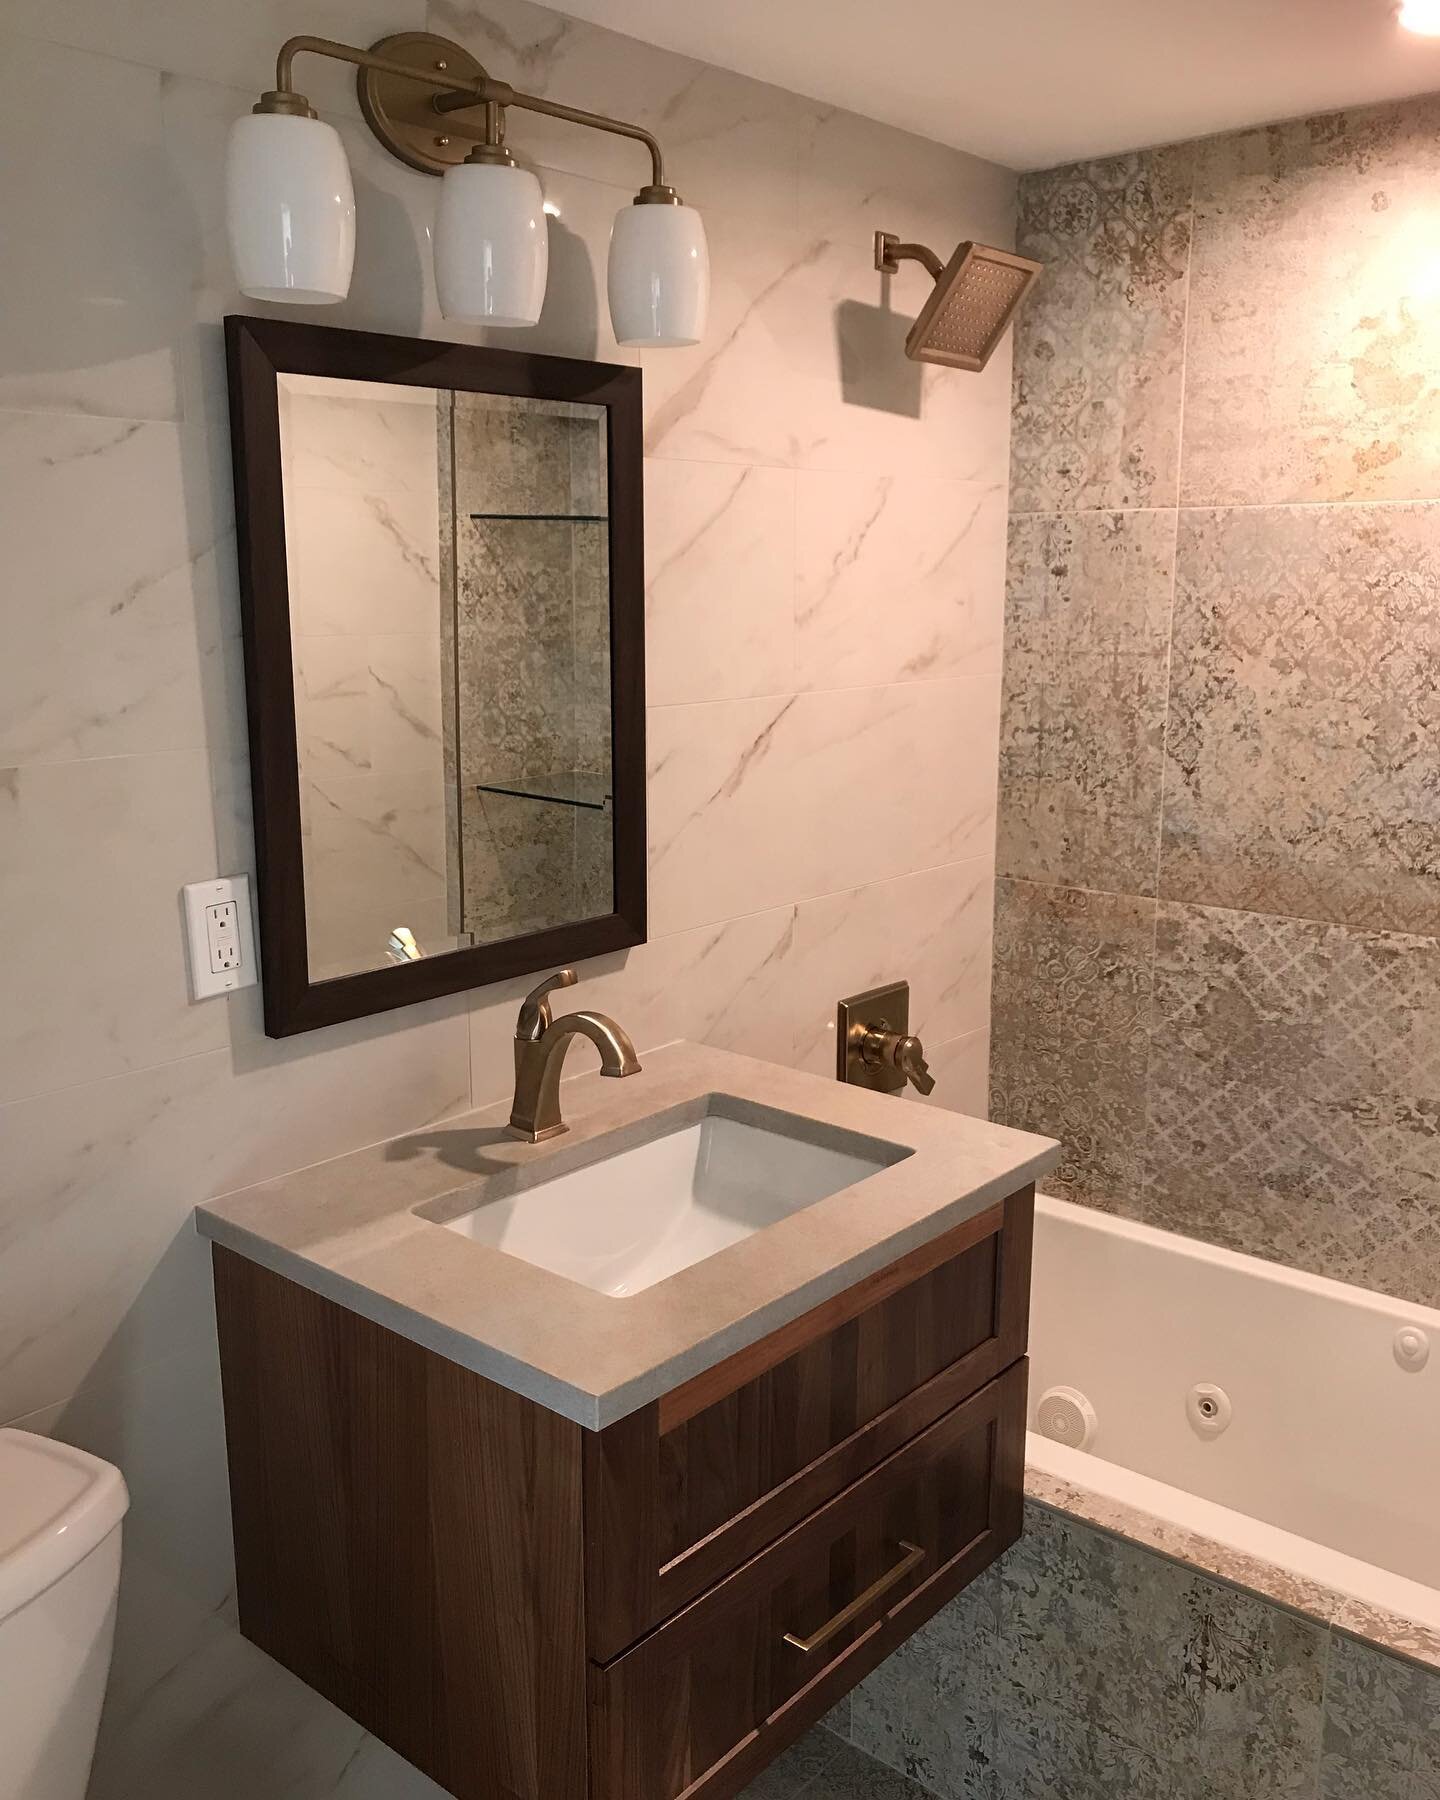 When re-designing this existing bath, it was all about making the space feel bigger. Here are some design tricks we used. No matter the size of your bathroom, wall-hung units are the best for visually making it appear you have more square footage by 